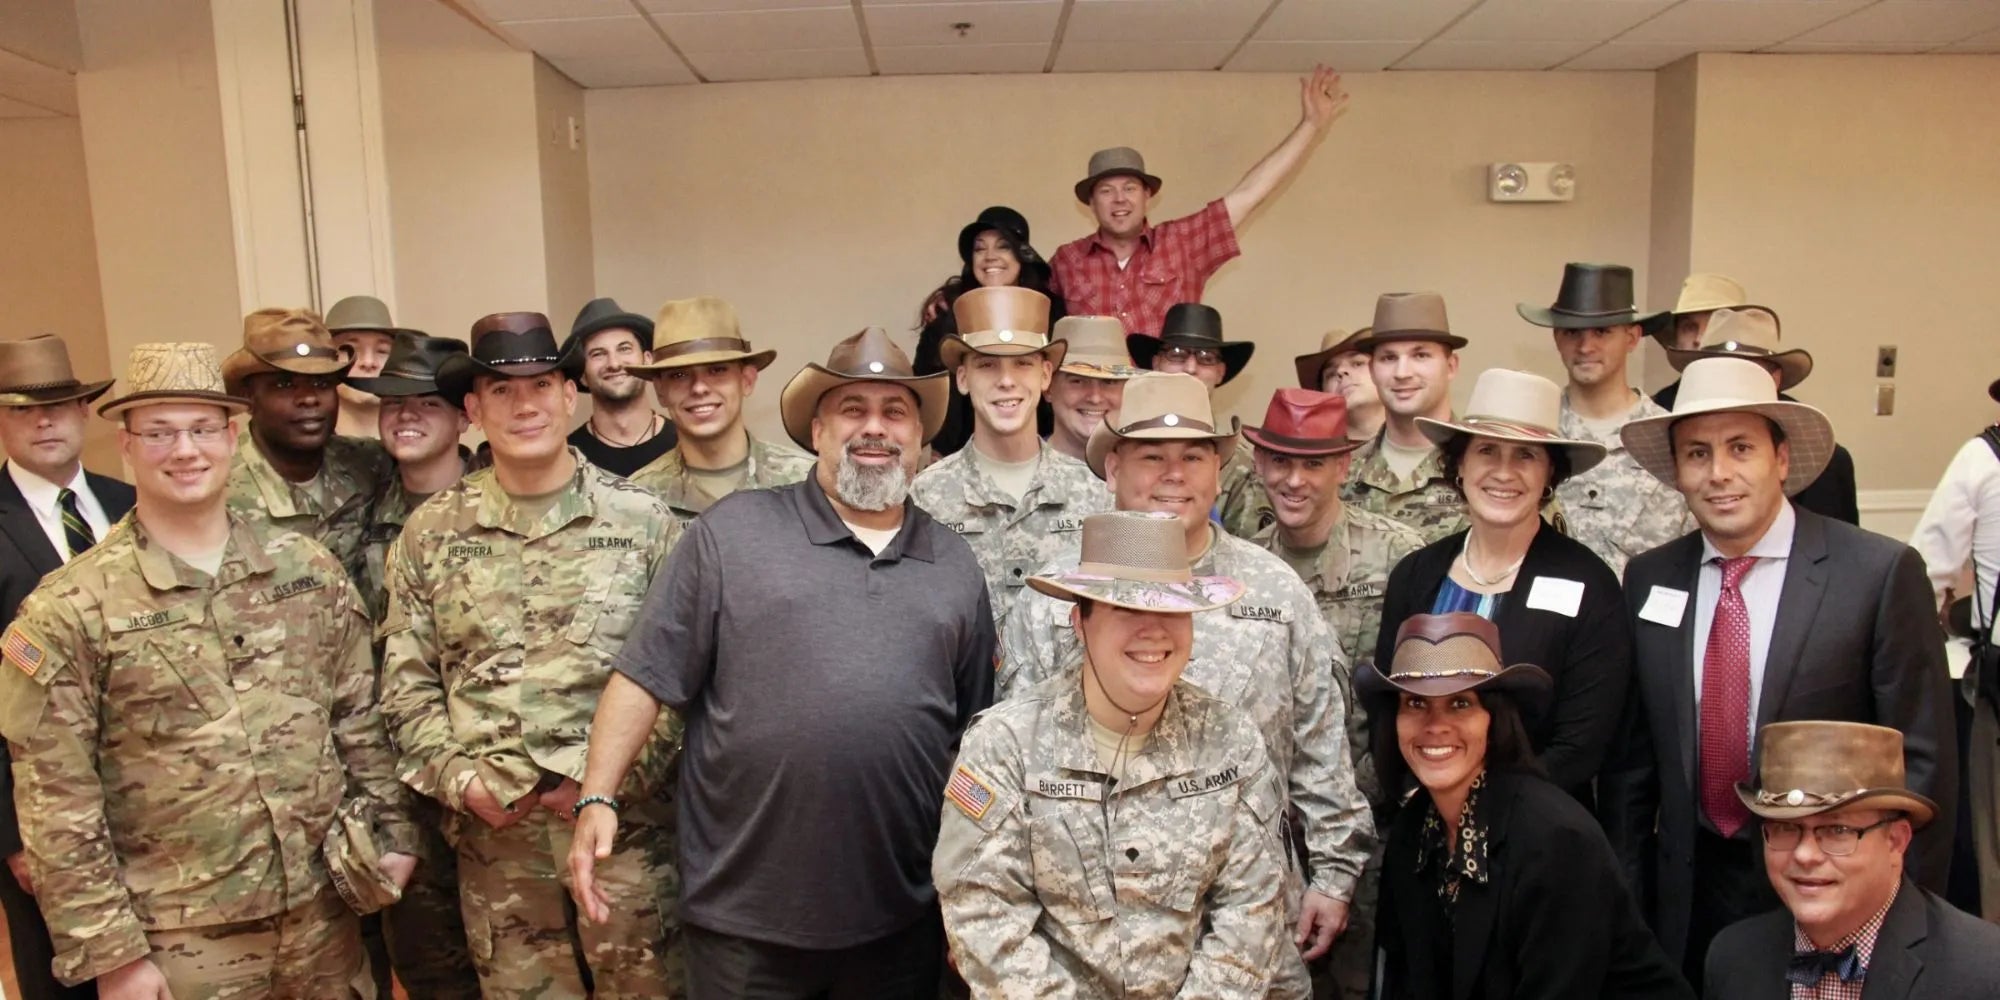 A group of American soldiers wearing different kinds of hats